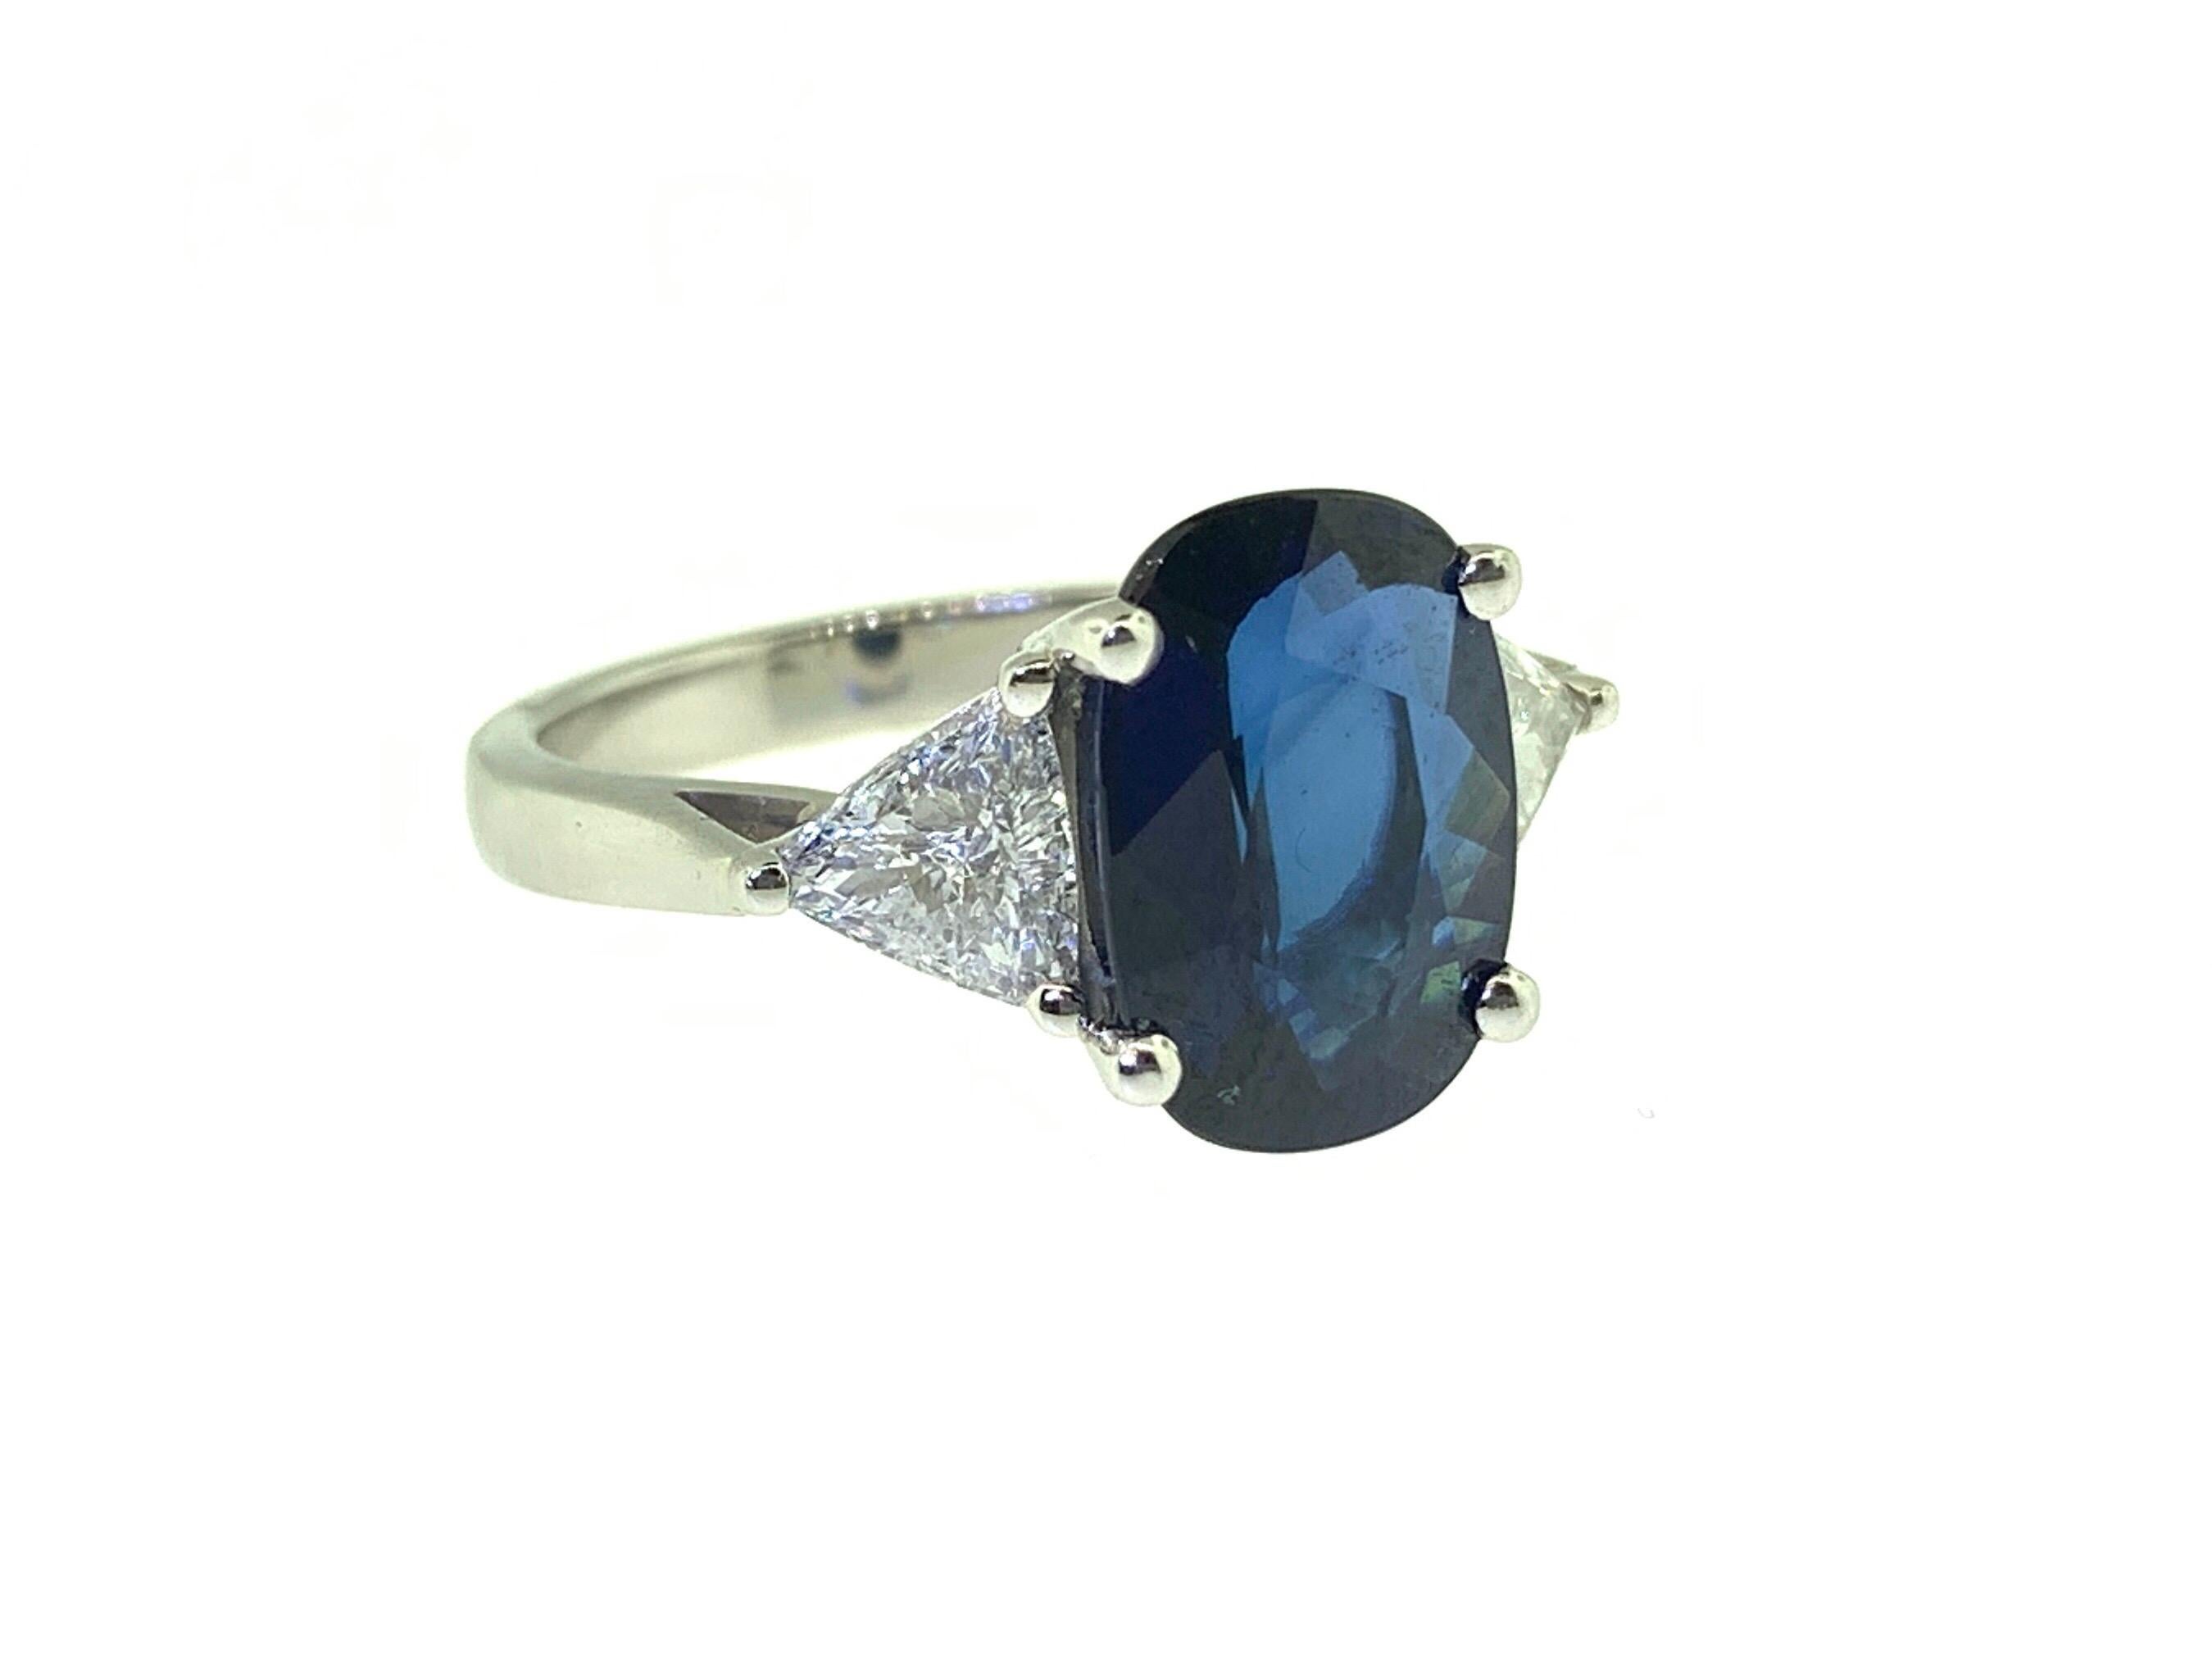 This beautiful cocktail ring showcases a stunning GIA Certified 4.01 carat Cushion Sapphire flanked by two Trillion Cut Diamonds (0.85 carats) set in Platinum. Ring size is 6.